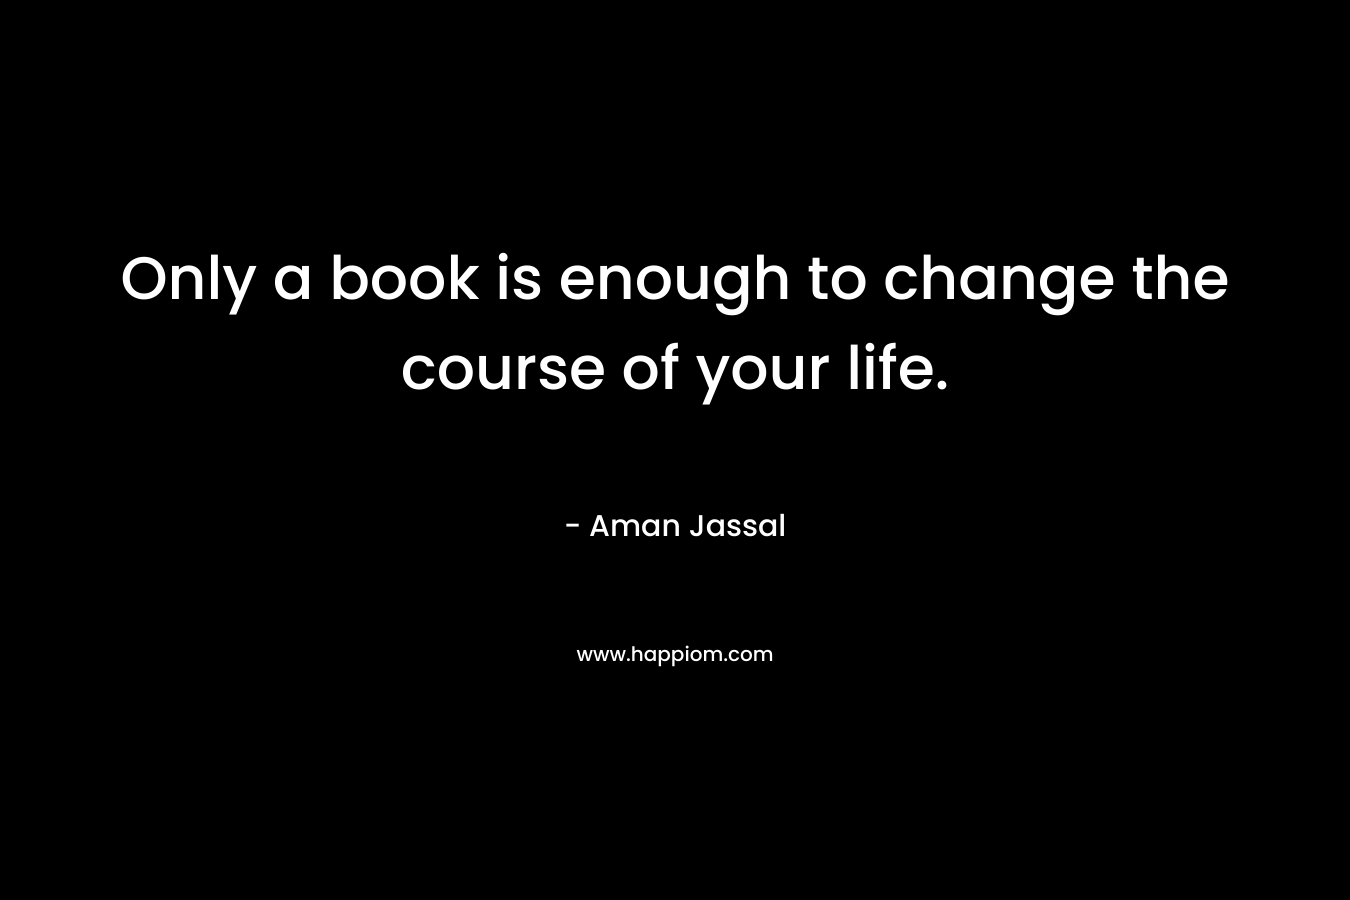 Only a book is enough to change the course of your life. – Aman Jassal